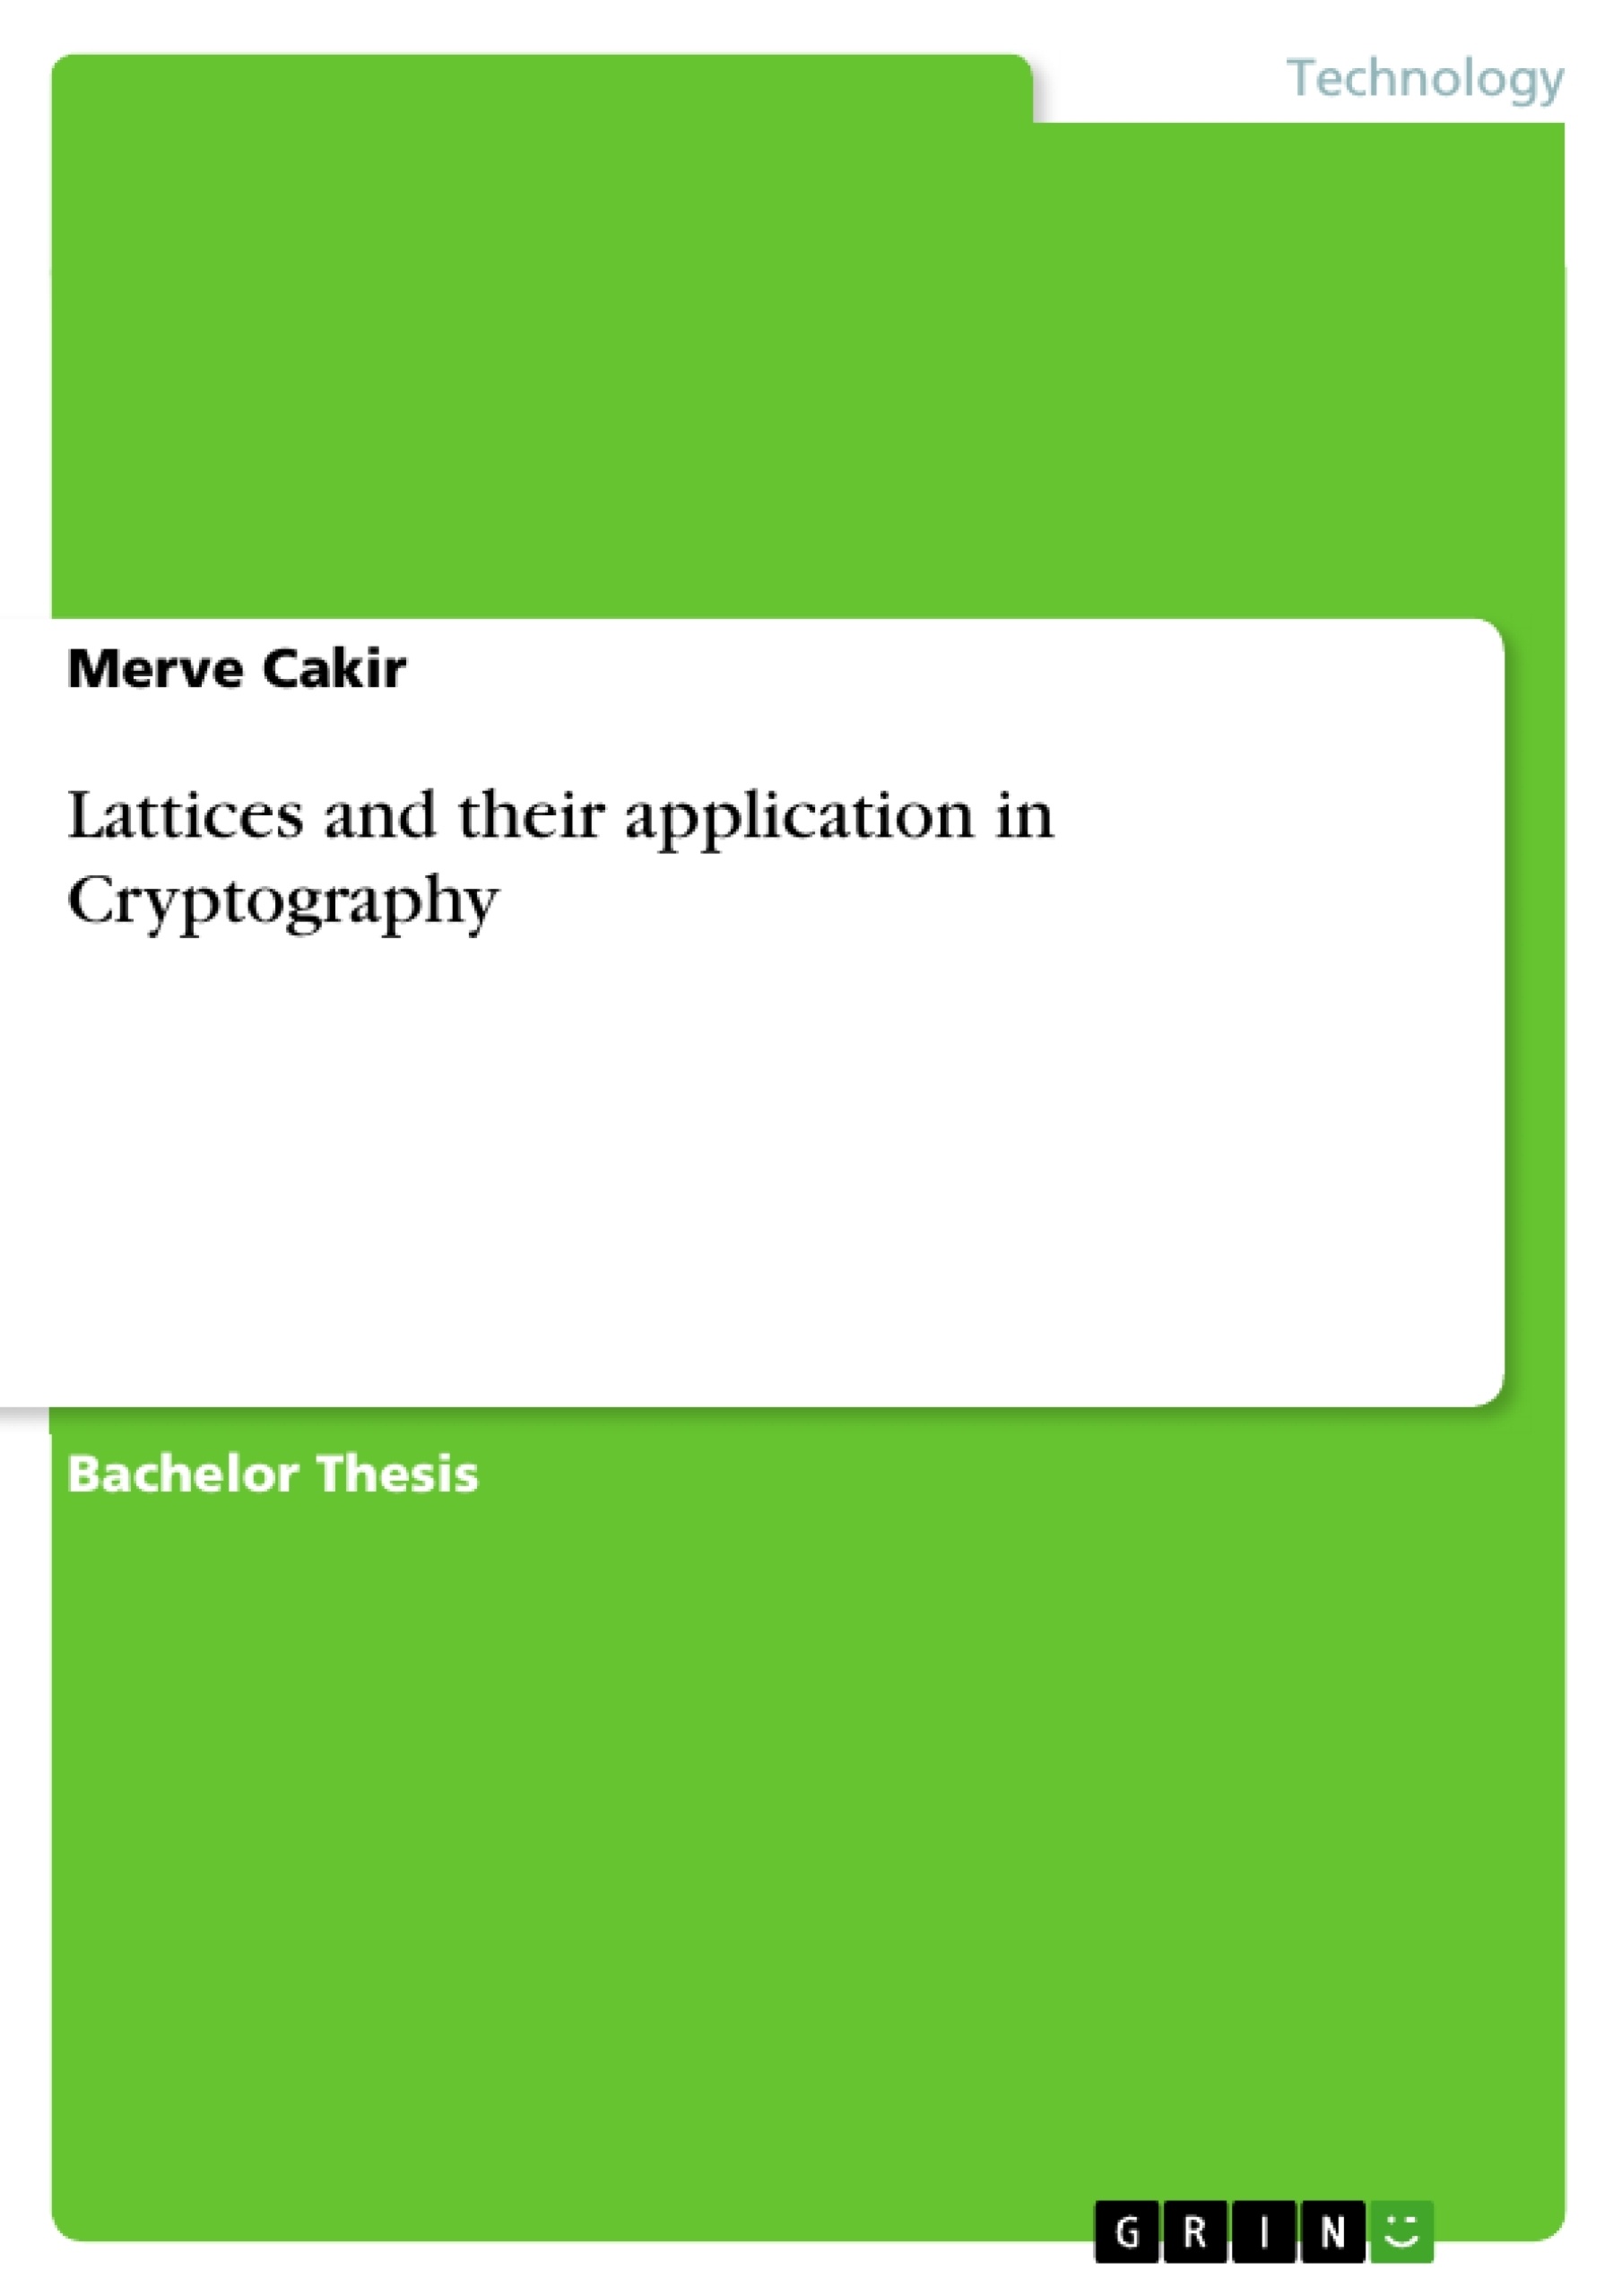 Latest thesis on cryptography